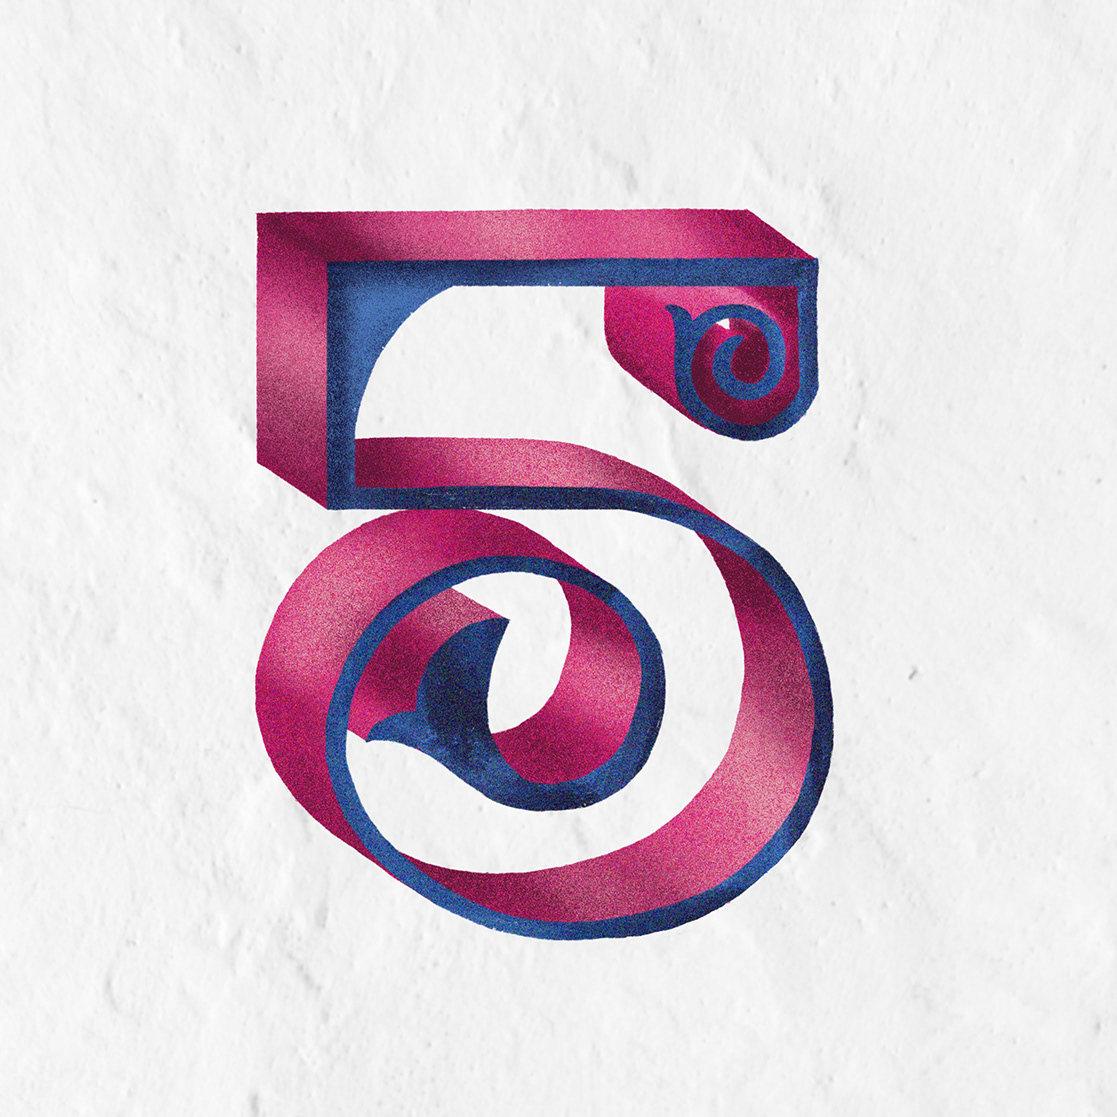 36daysoftype experimental font lettering type typedesign typo typography   vernacular